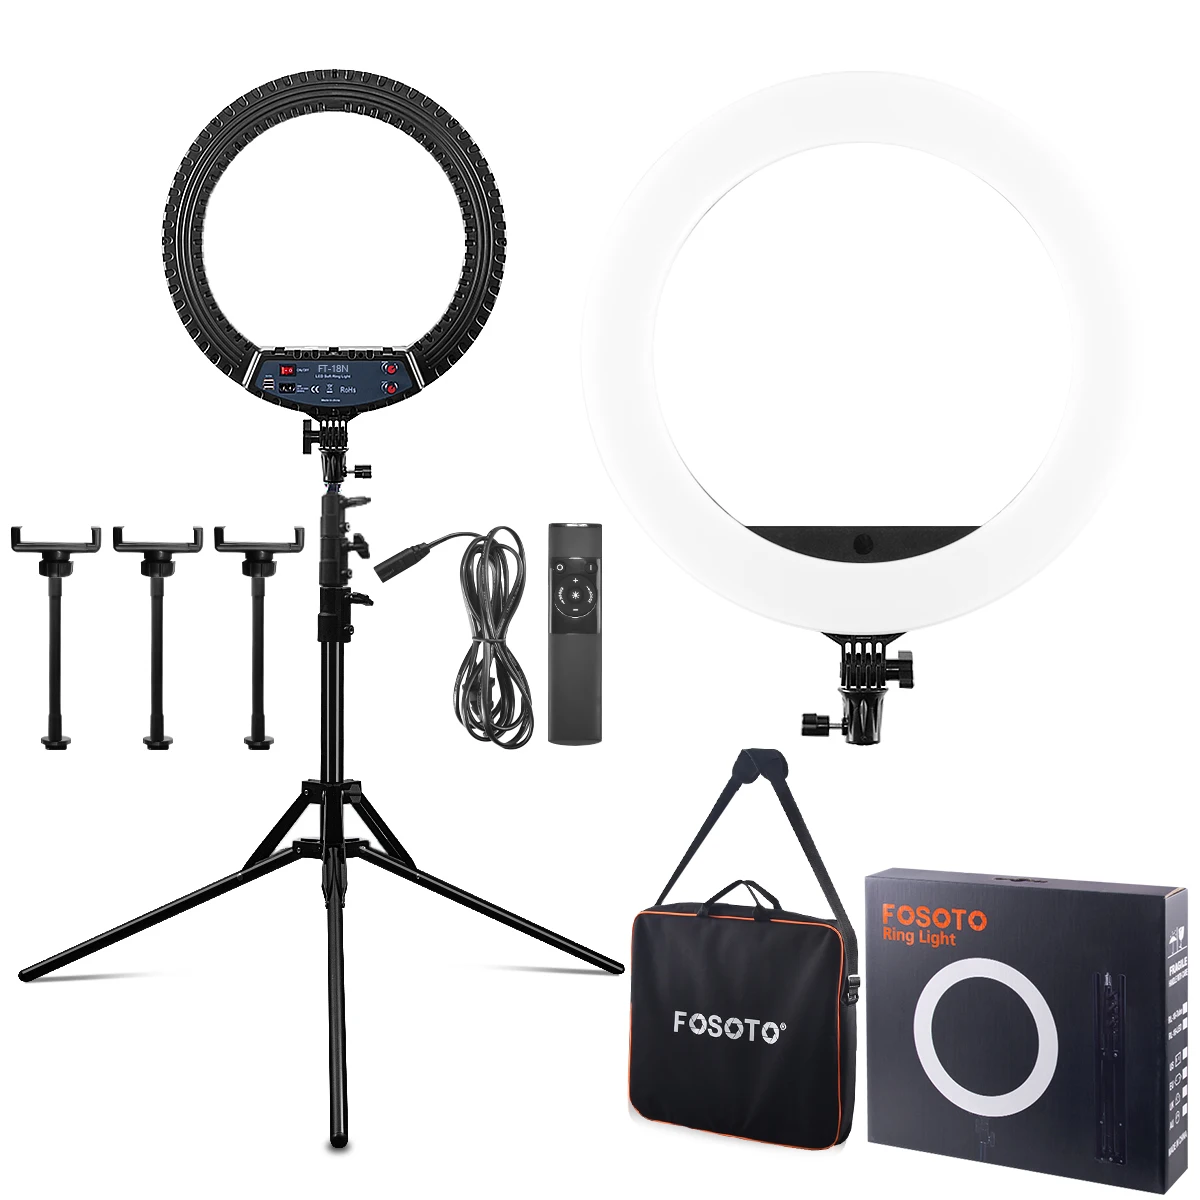 

FT-18N 55W High Quality Ring Selfie Light Big Beauty Makeup LED Ring Light with Phone Holder Tripod Stand 18inch LED Ring Light